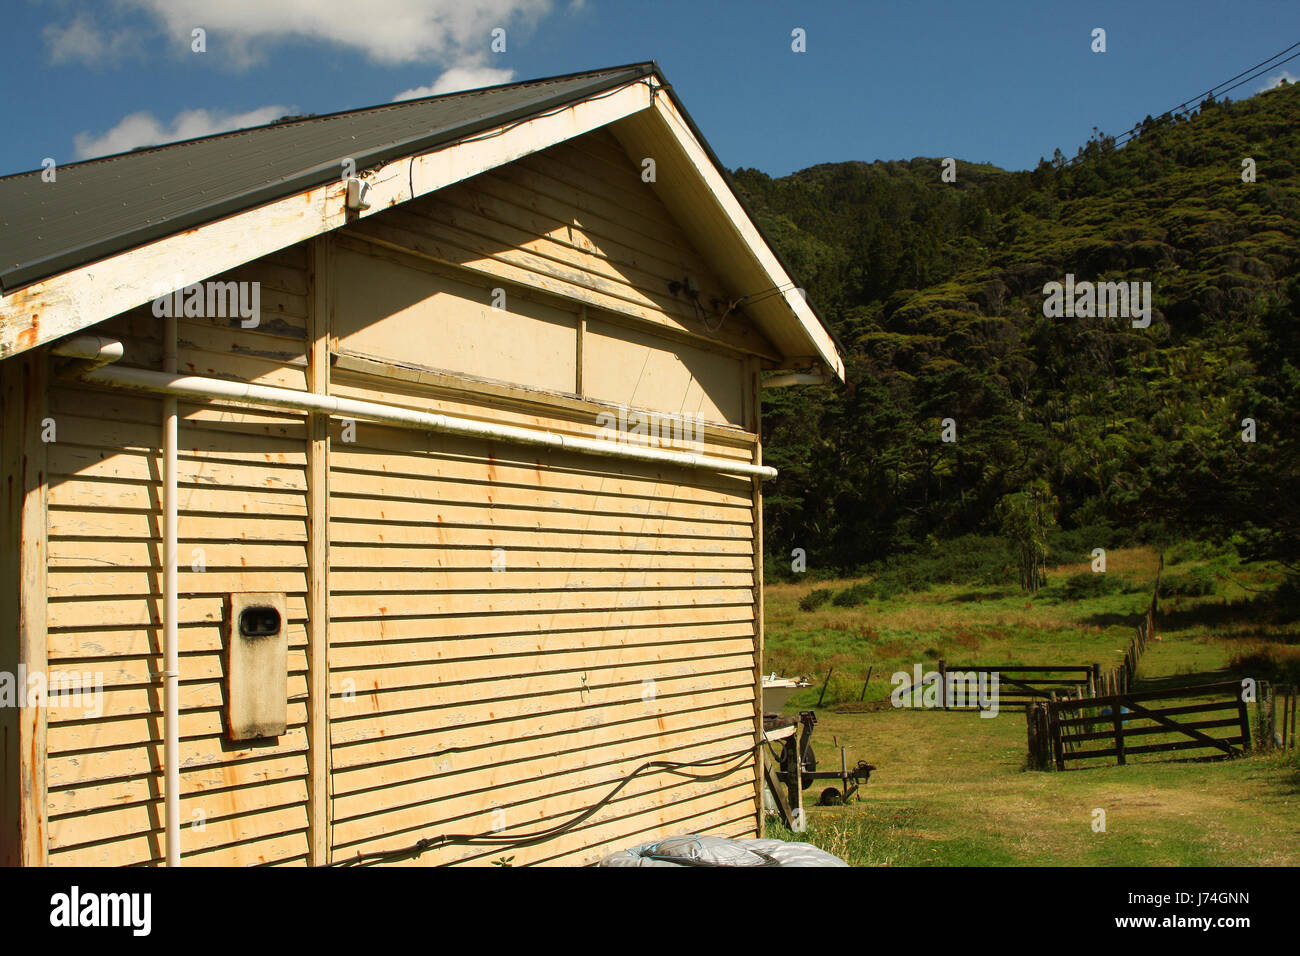 bucolic agriculture farming hovel fence meadow lodge forest hut willow bucolic Stock Photo